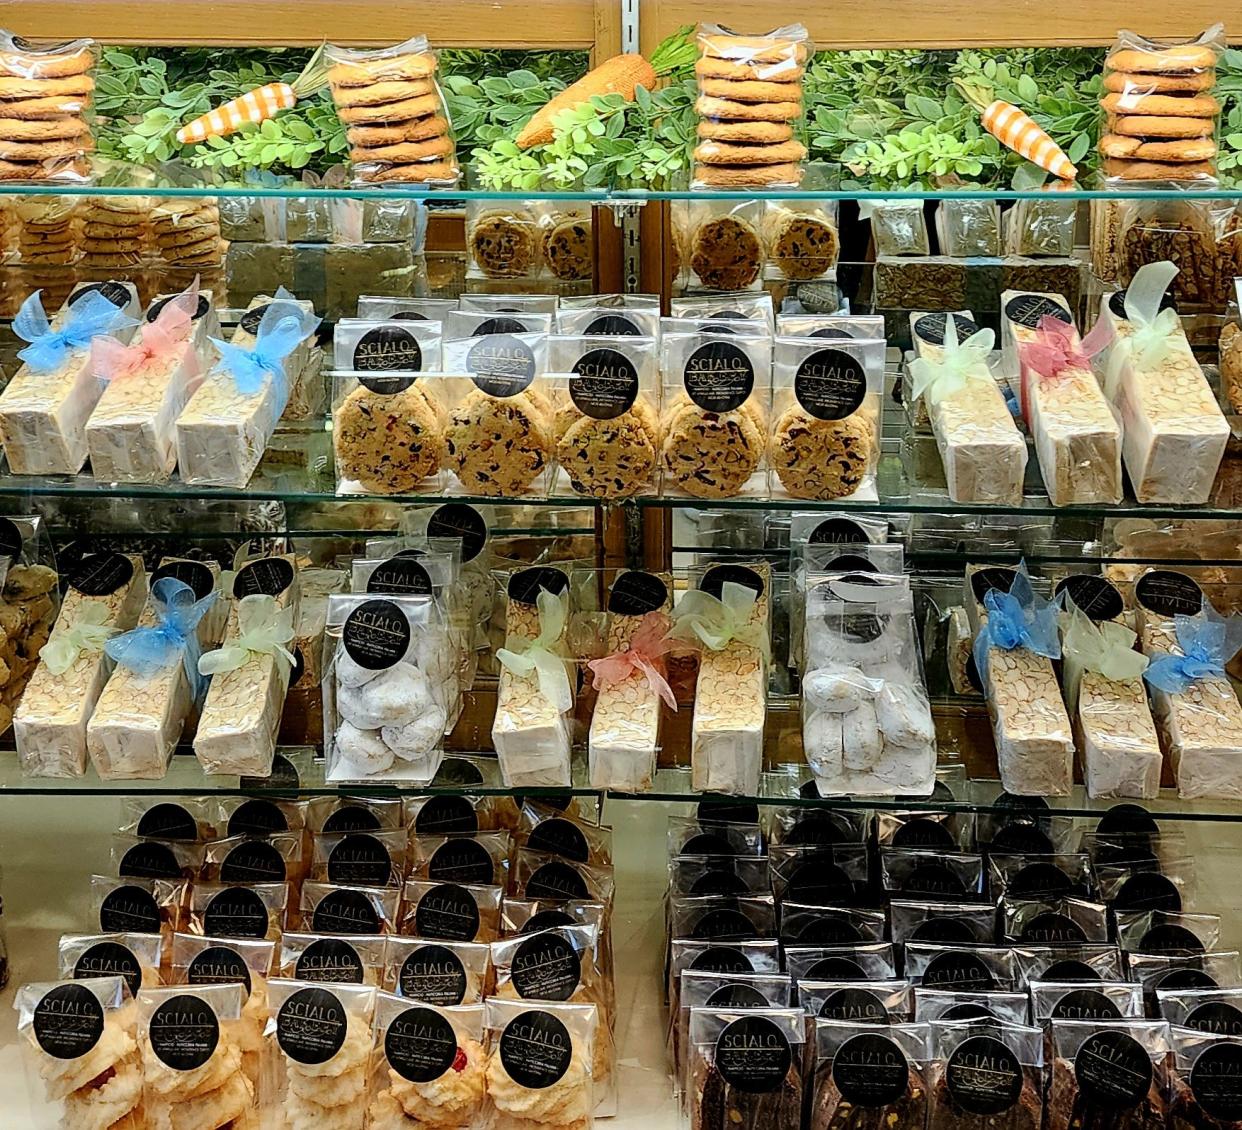 All the torrone, packaged cookies and biscotti at Scialos are ready for Easter shoppers. It's the last torrrone of the season. It will soon be too warm to produce the nouget candy made with honey and almonds.